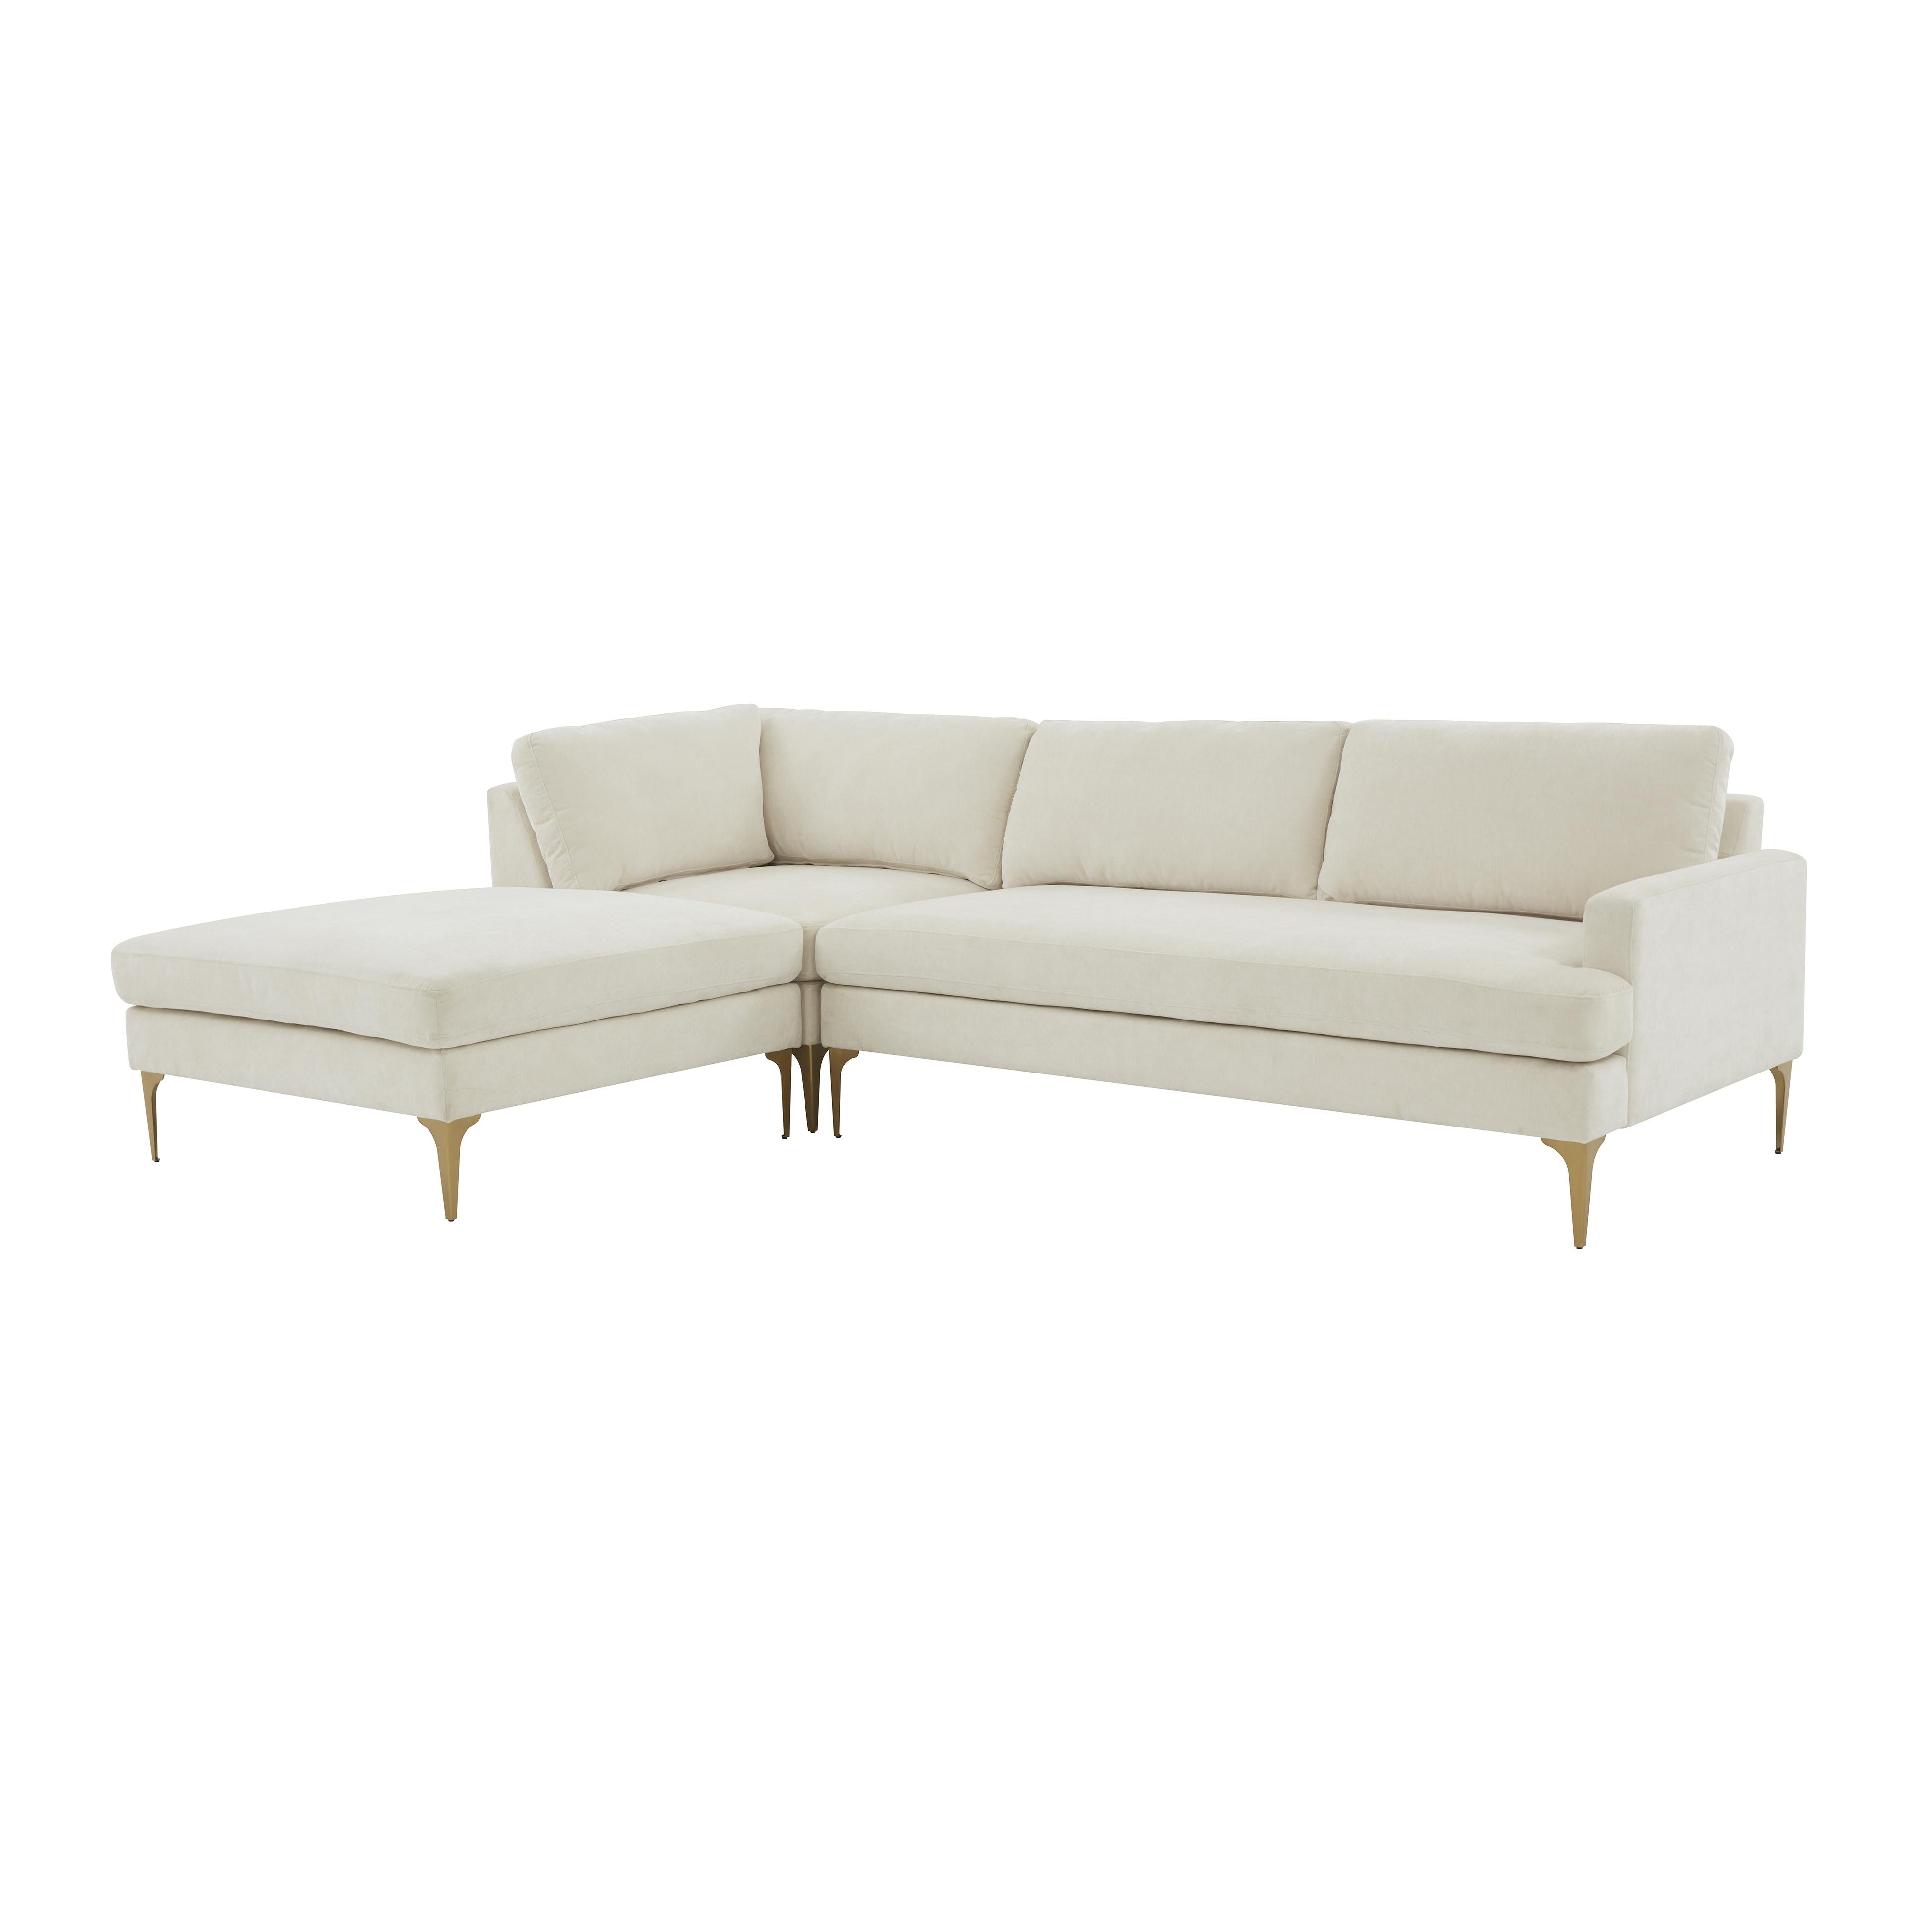 Tov Furniture Accent Chairs - Serena Cream Velvet LAF Chaise Sectional